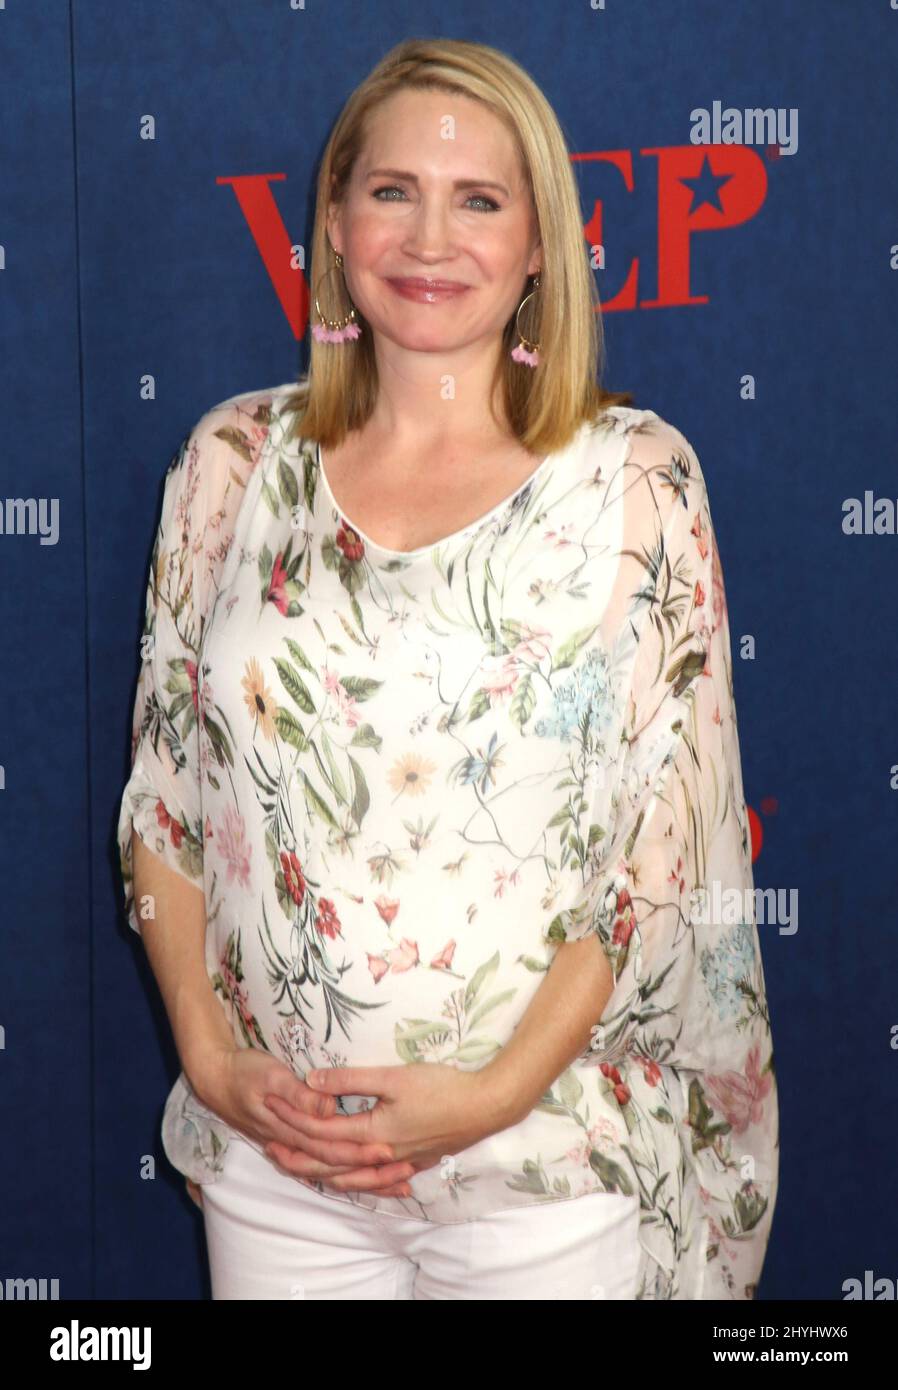 Andrea Canning attending the Veep Season 7 Premiere in New York Stock Photo